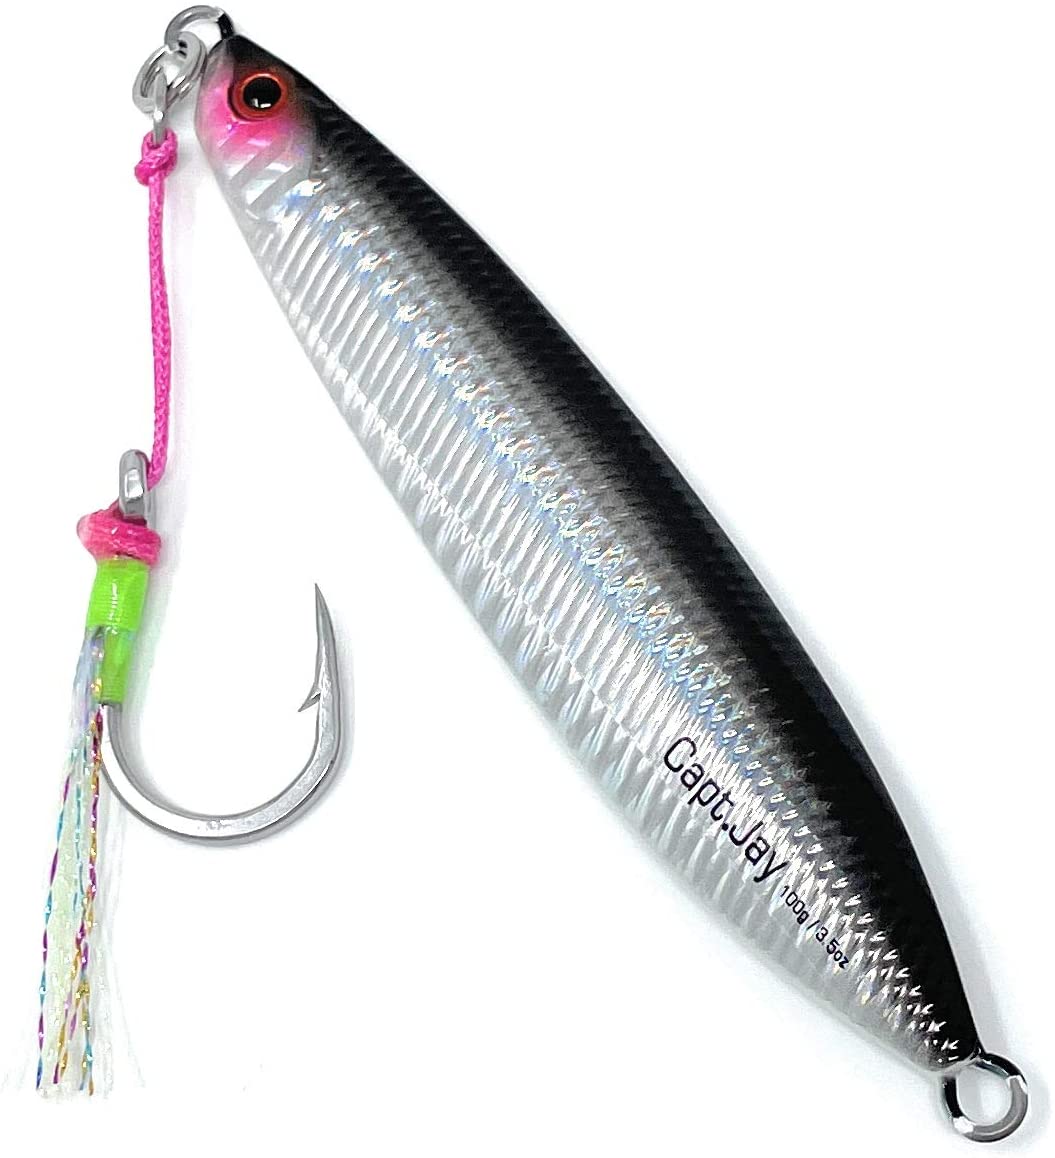 Artificial Lures For Surf Fishing
